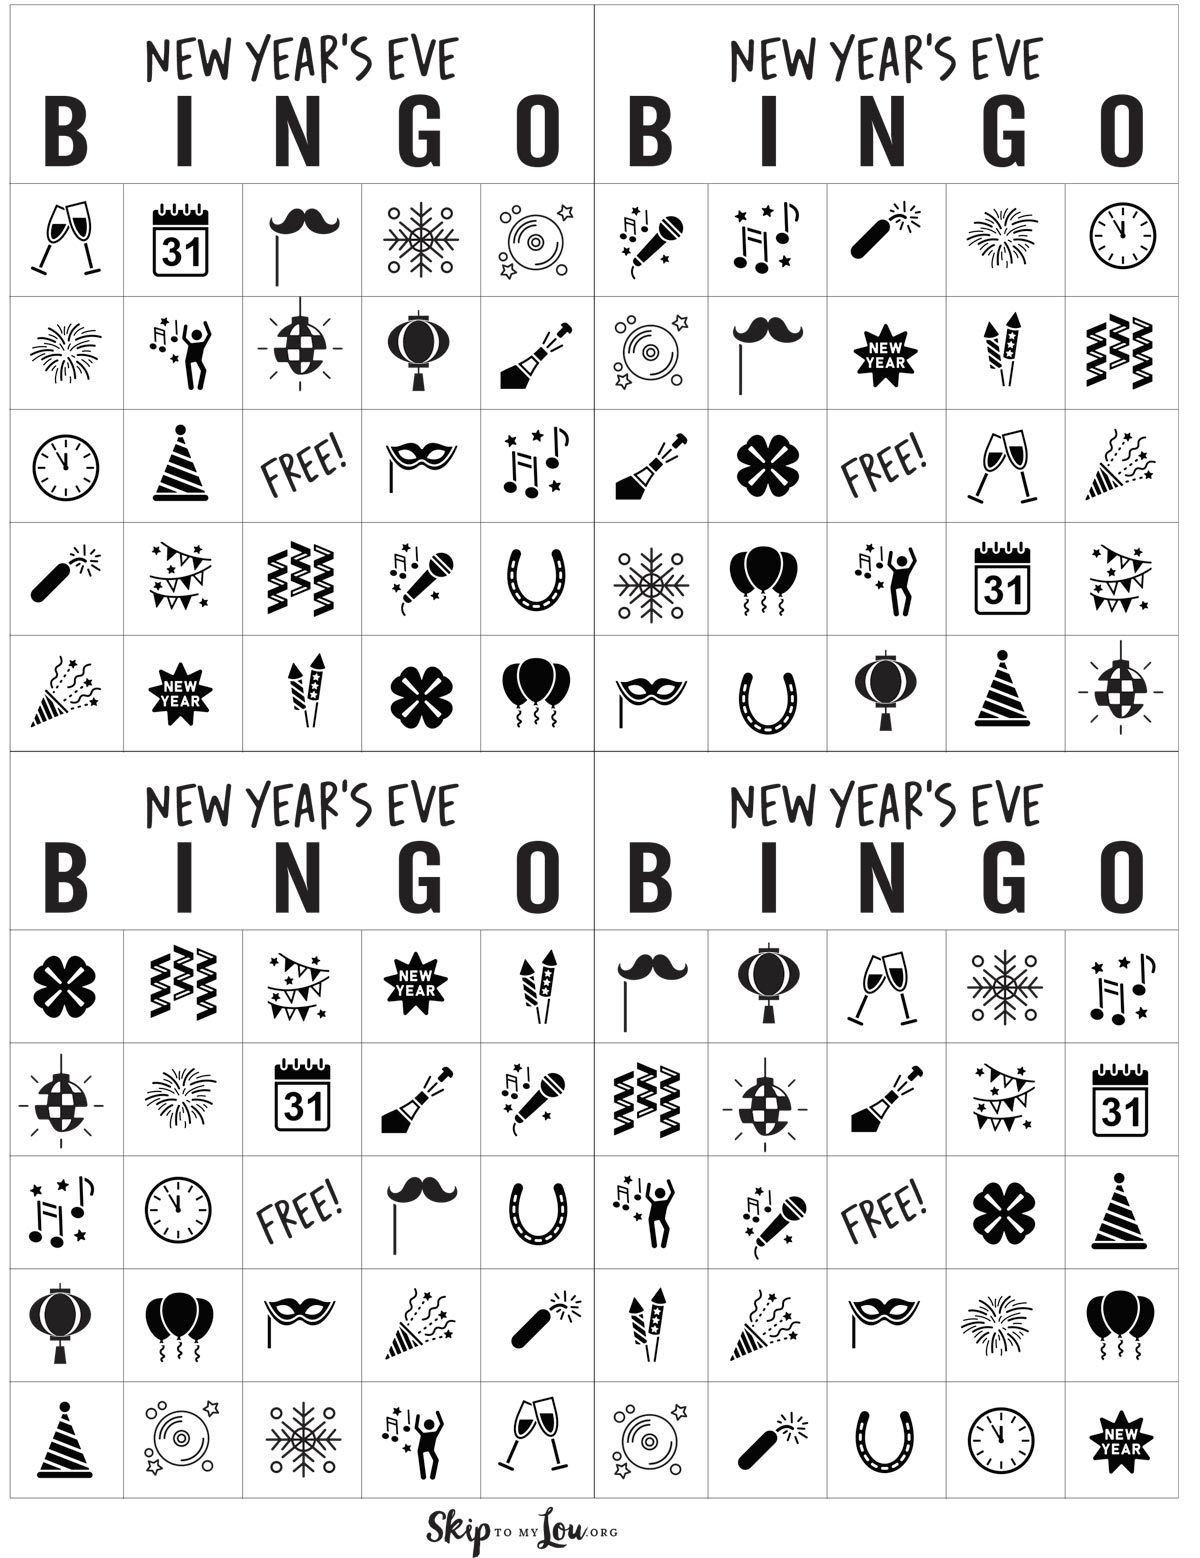 four new year's eve bingo cards to print